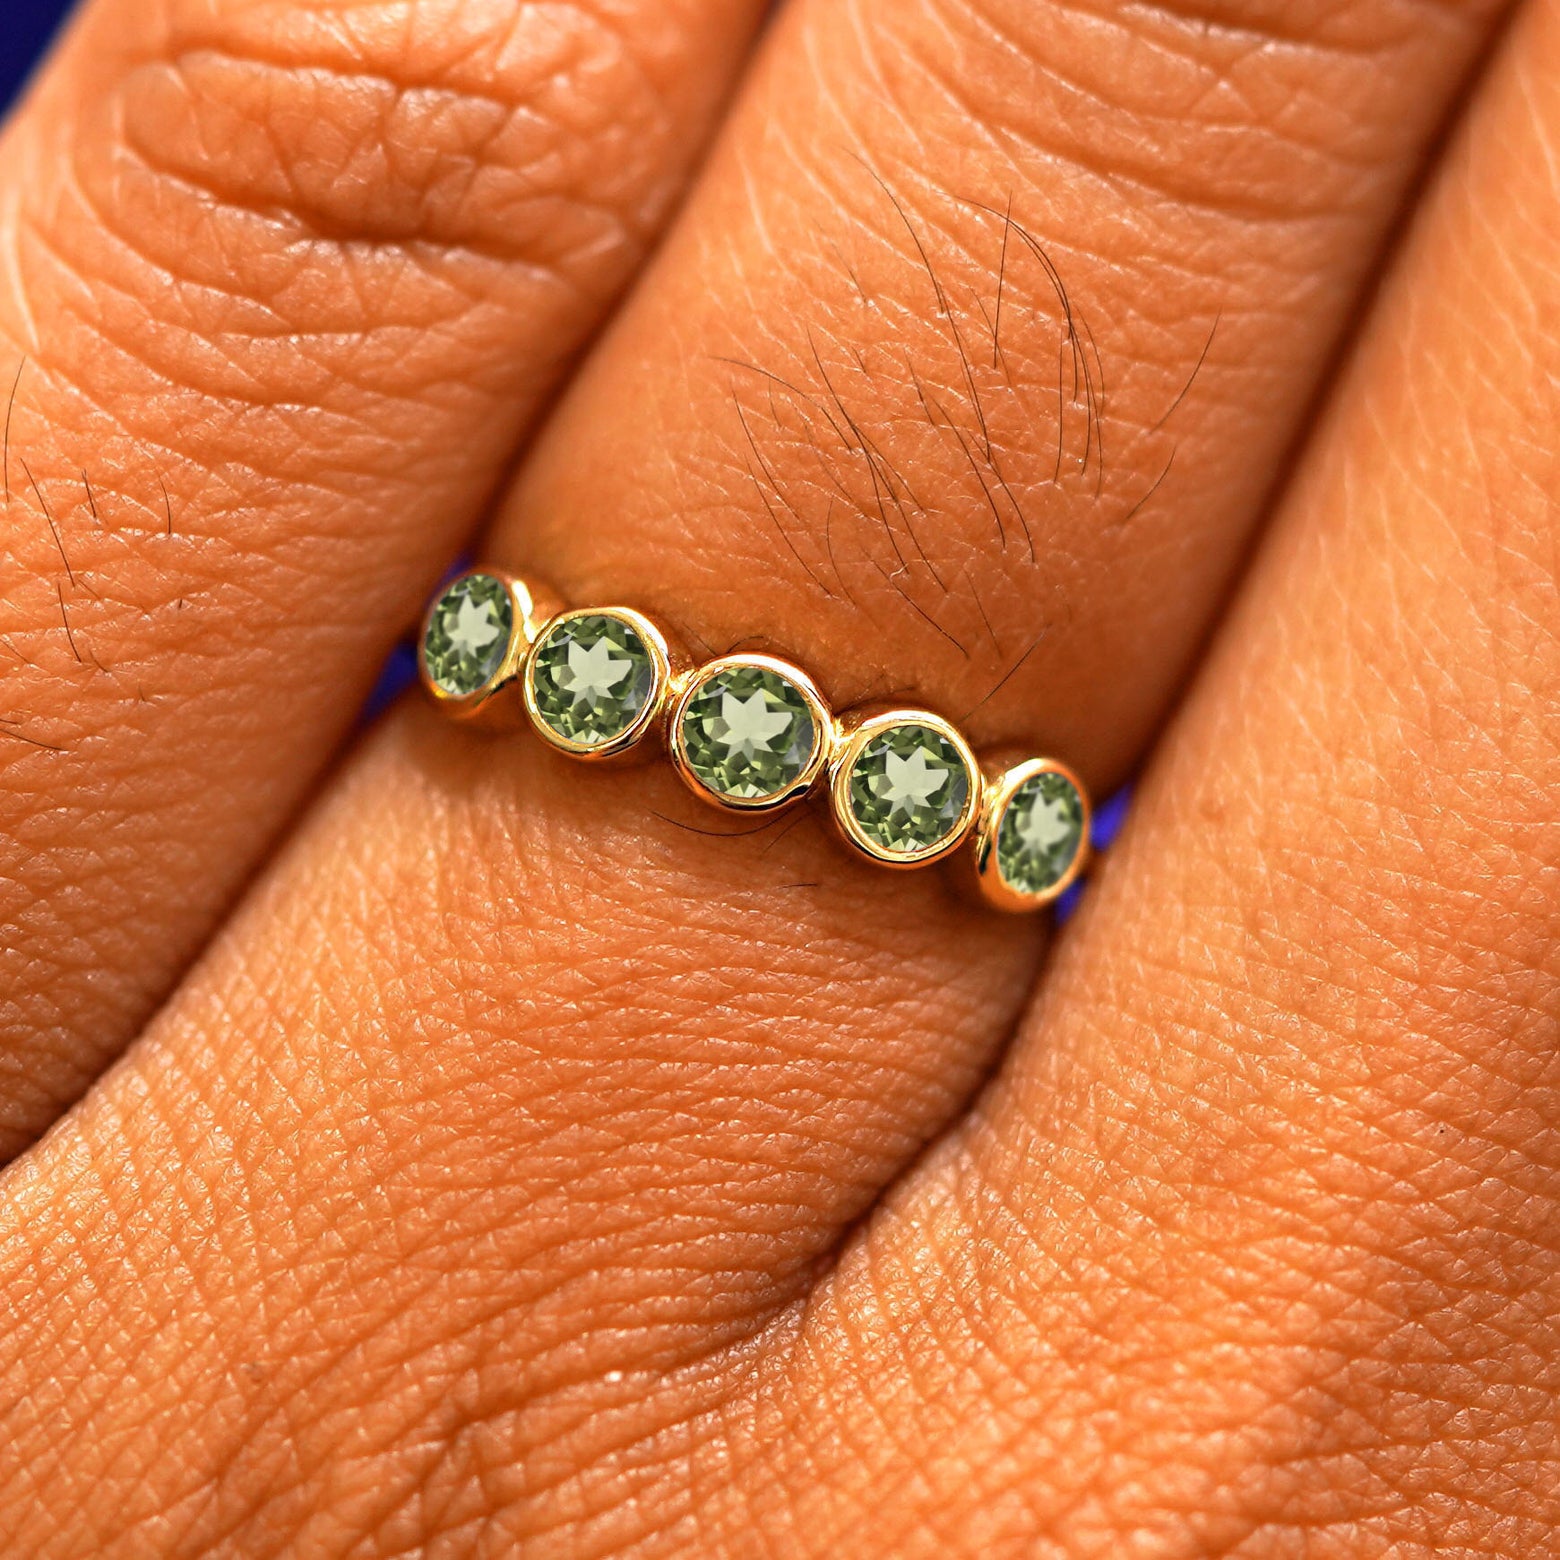 Close up view of a model's hand wearing a yellow gold 5 Gemstones Ring in peridot